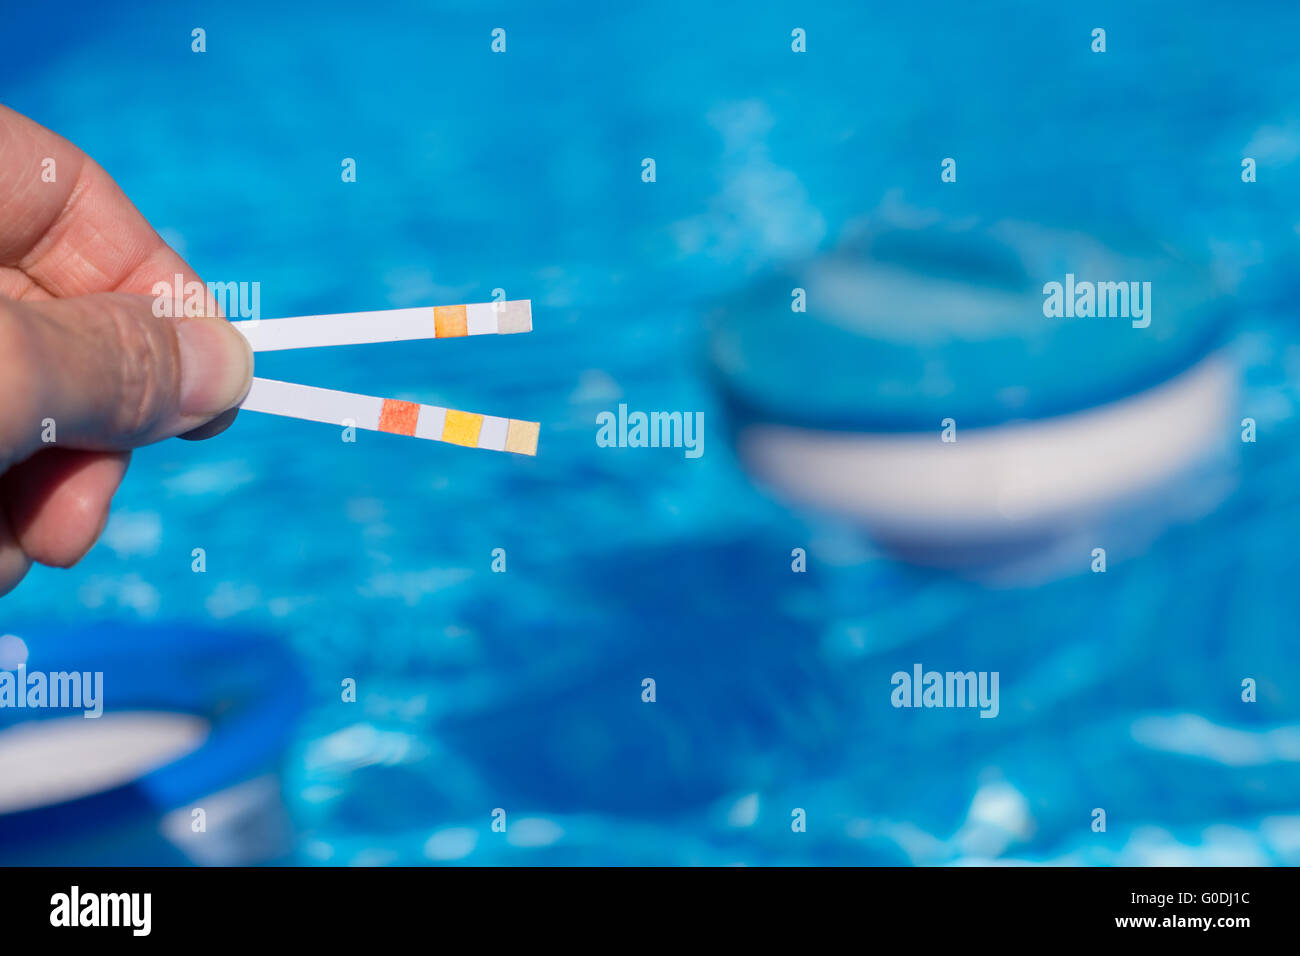 Test strip shows important values in the pool Stock Photo